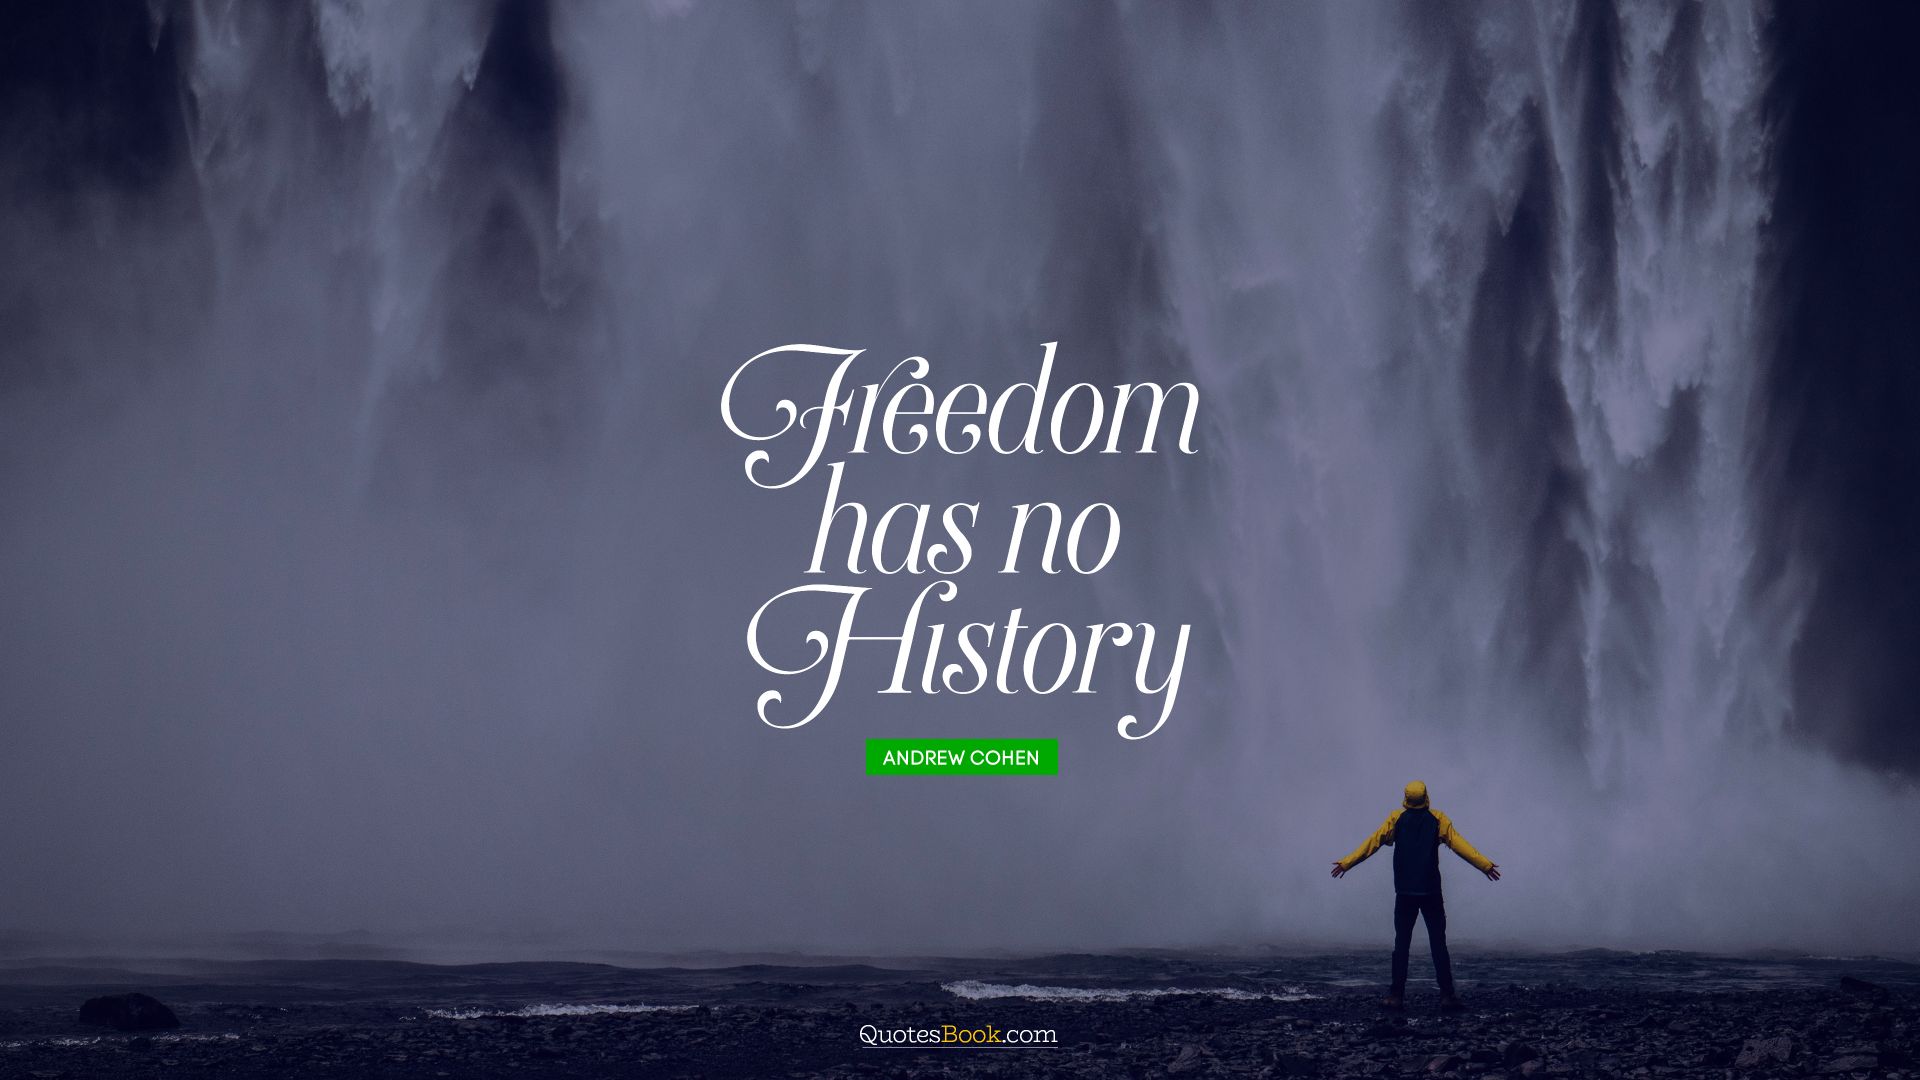 Freedom has no history. - Quote by Andrew Cohen